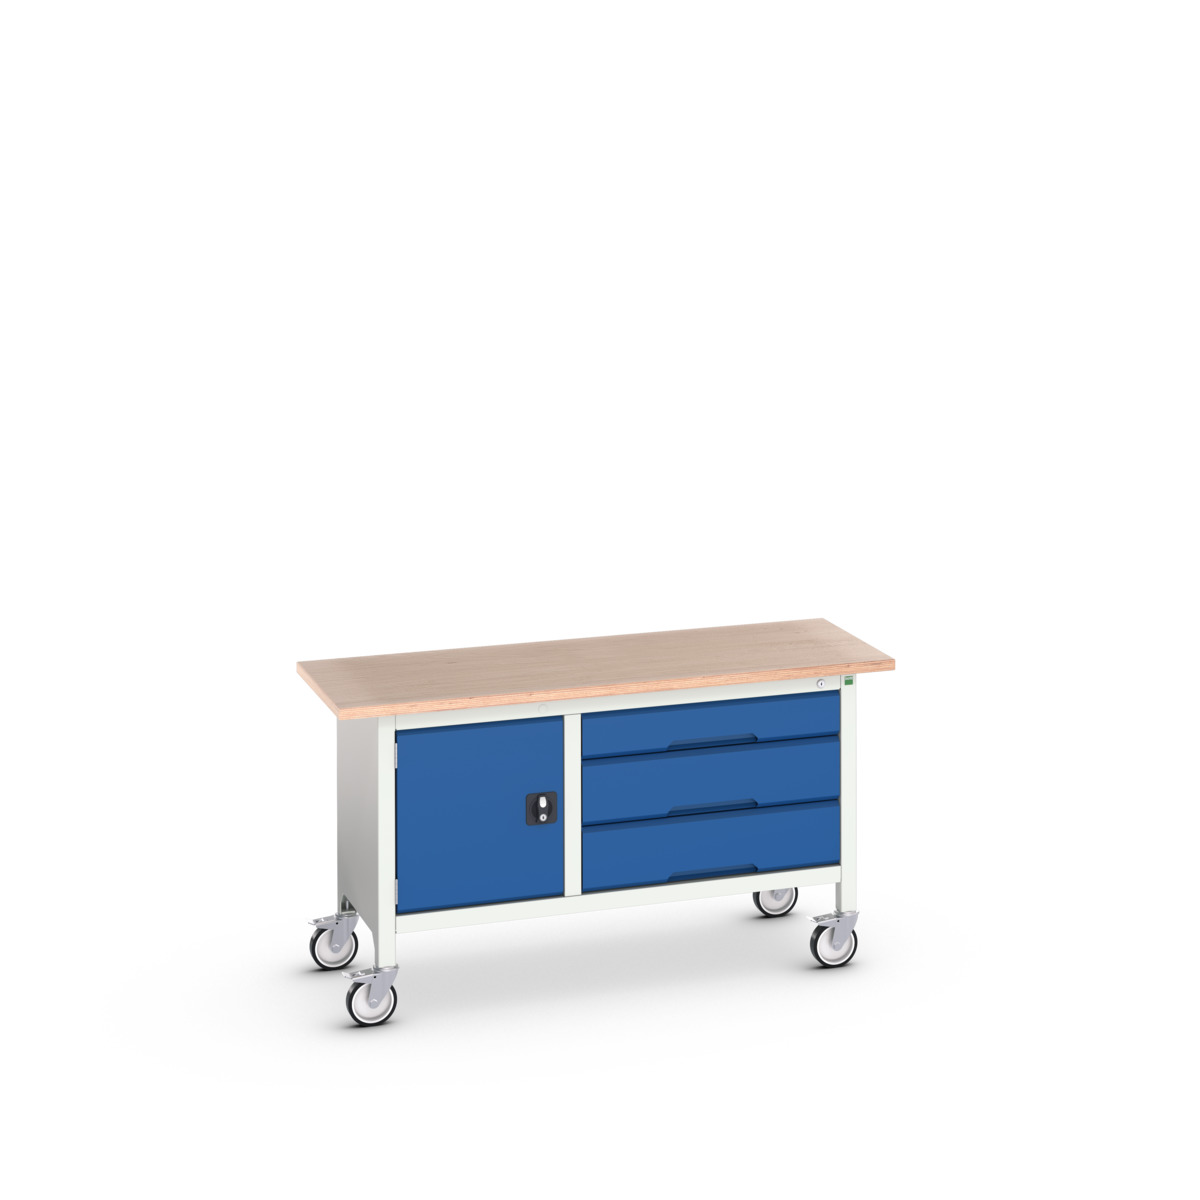 16923214.11 - verso mobile storage bench (mpx)